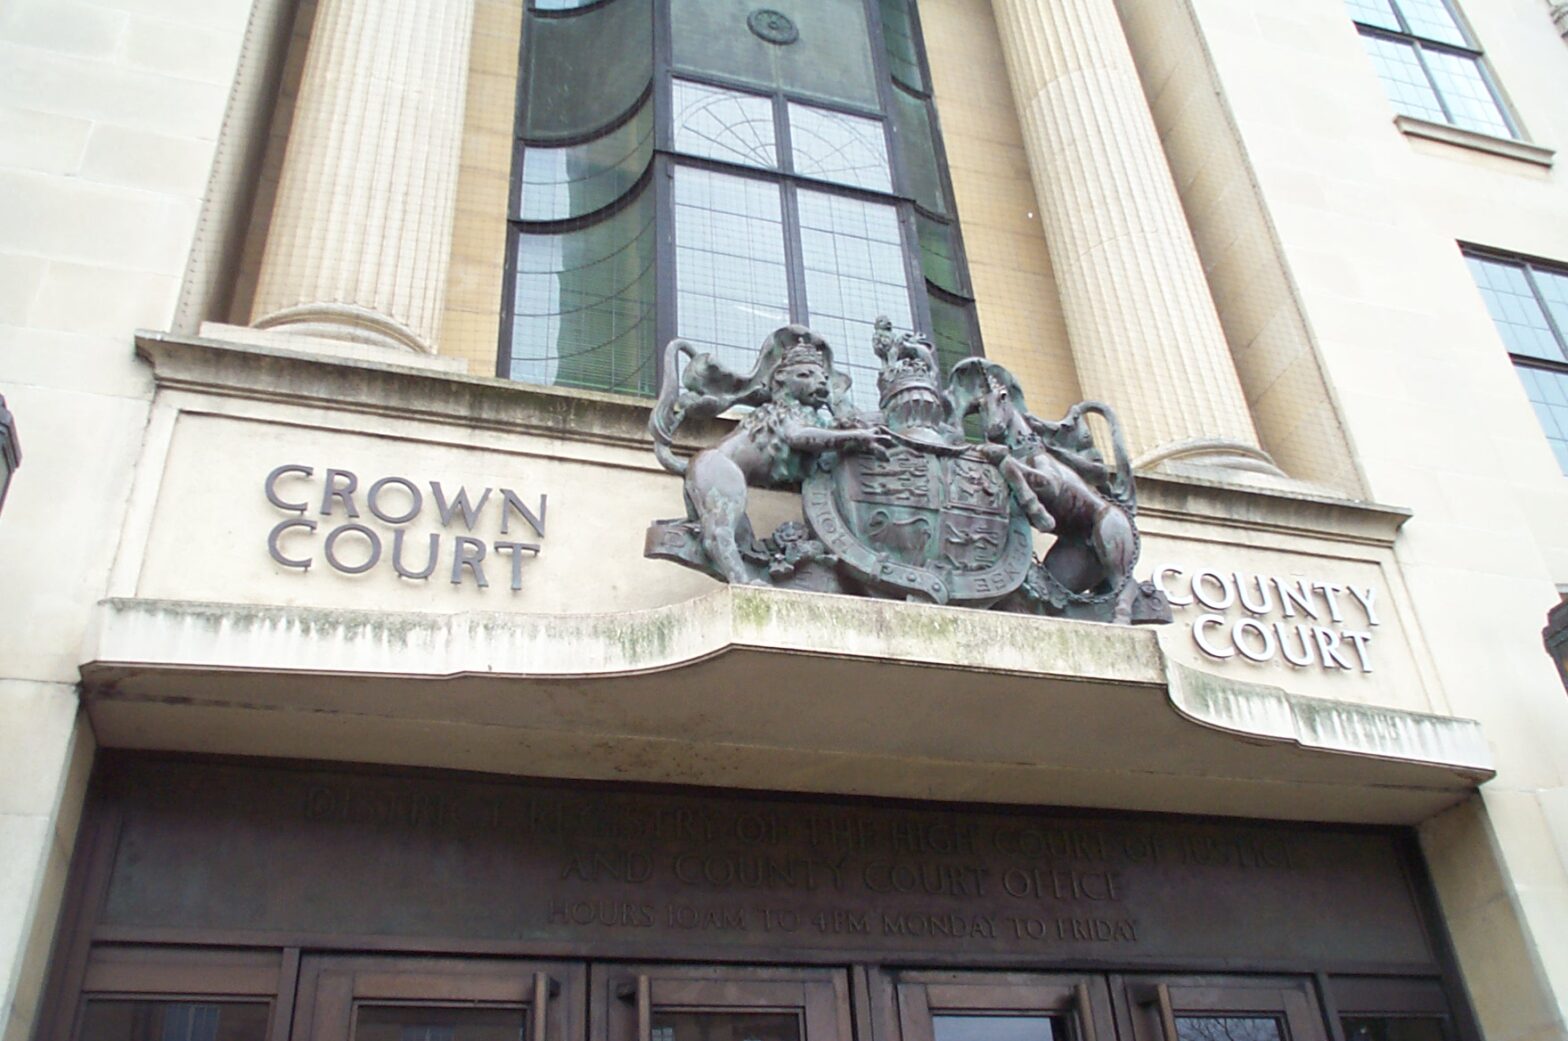 outside image of the crown court